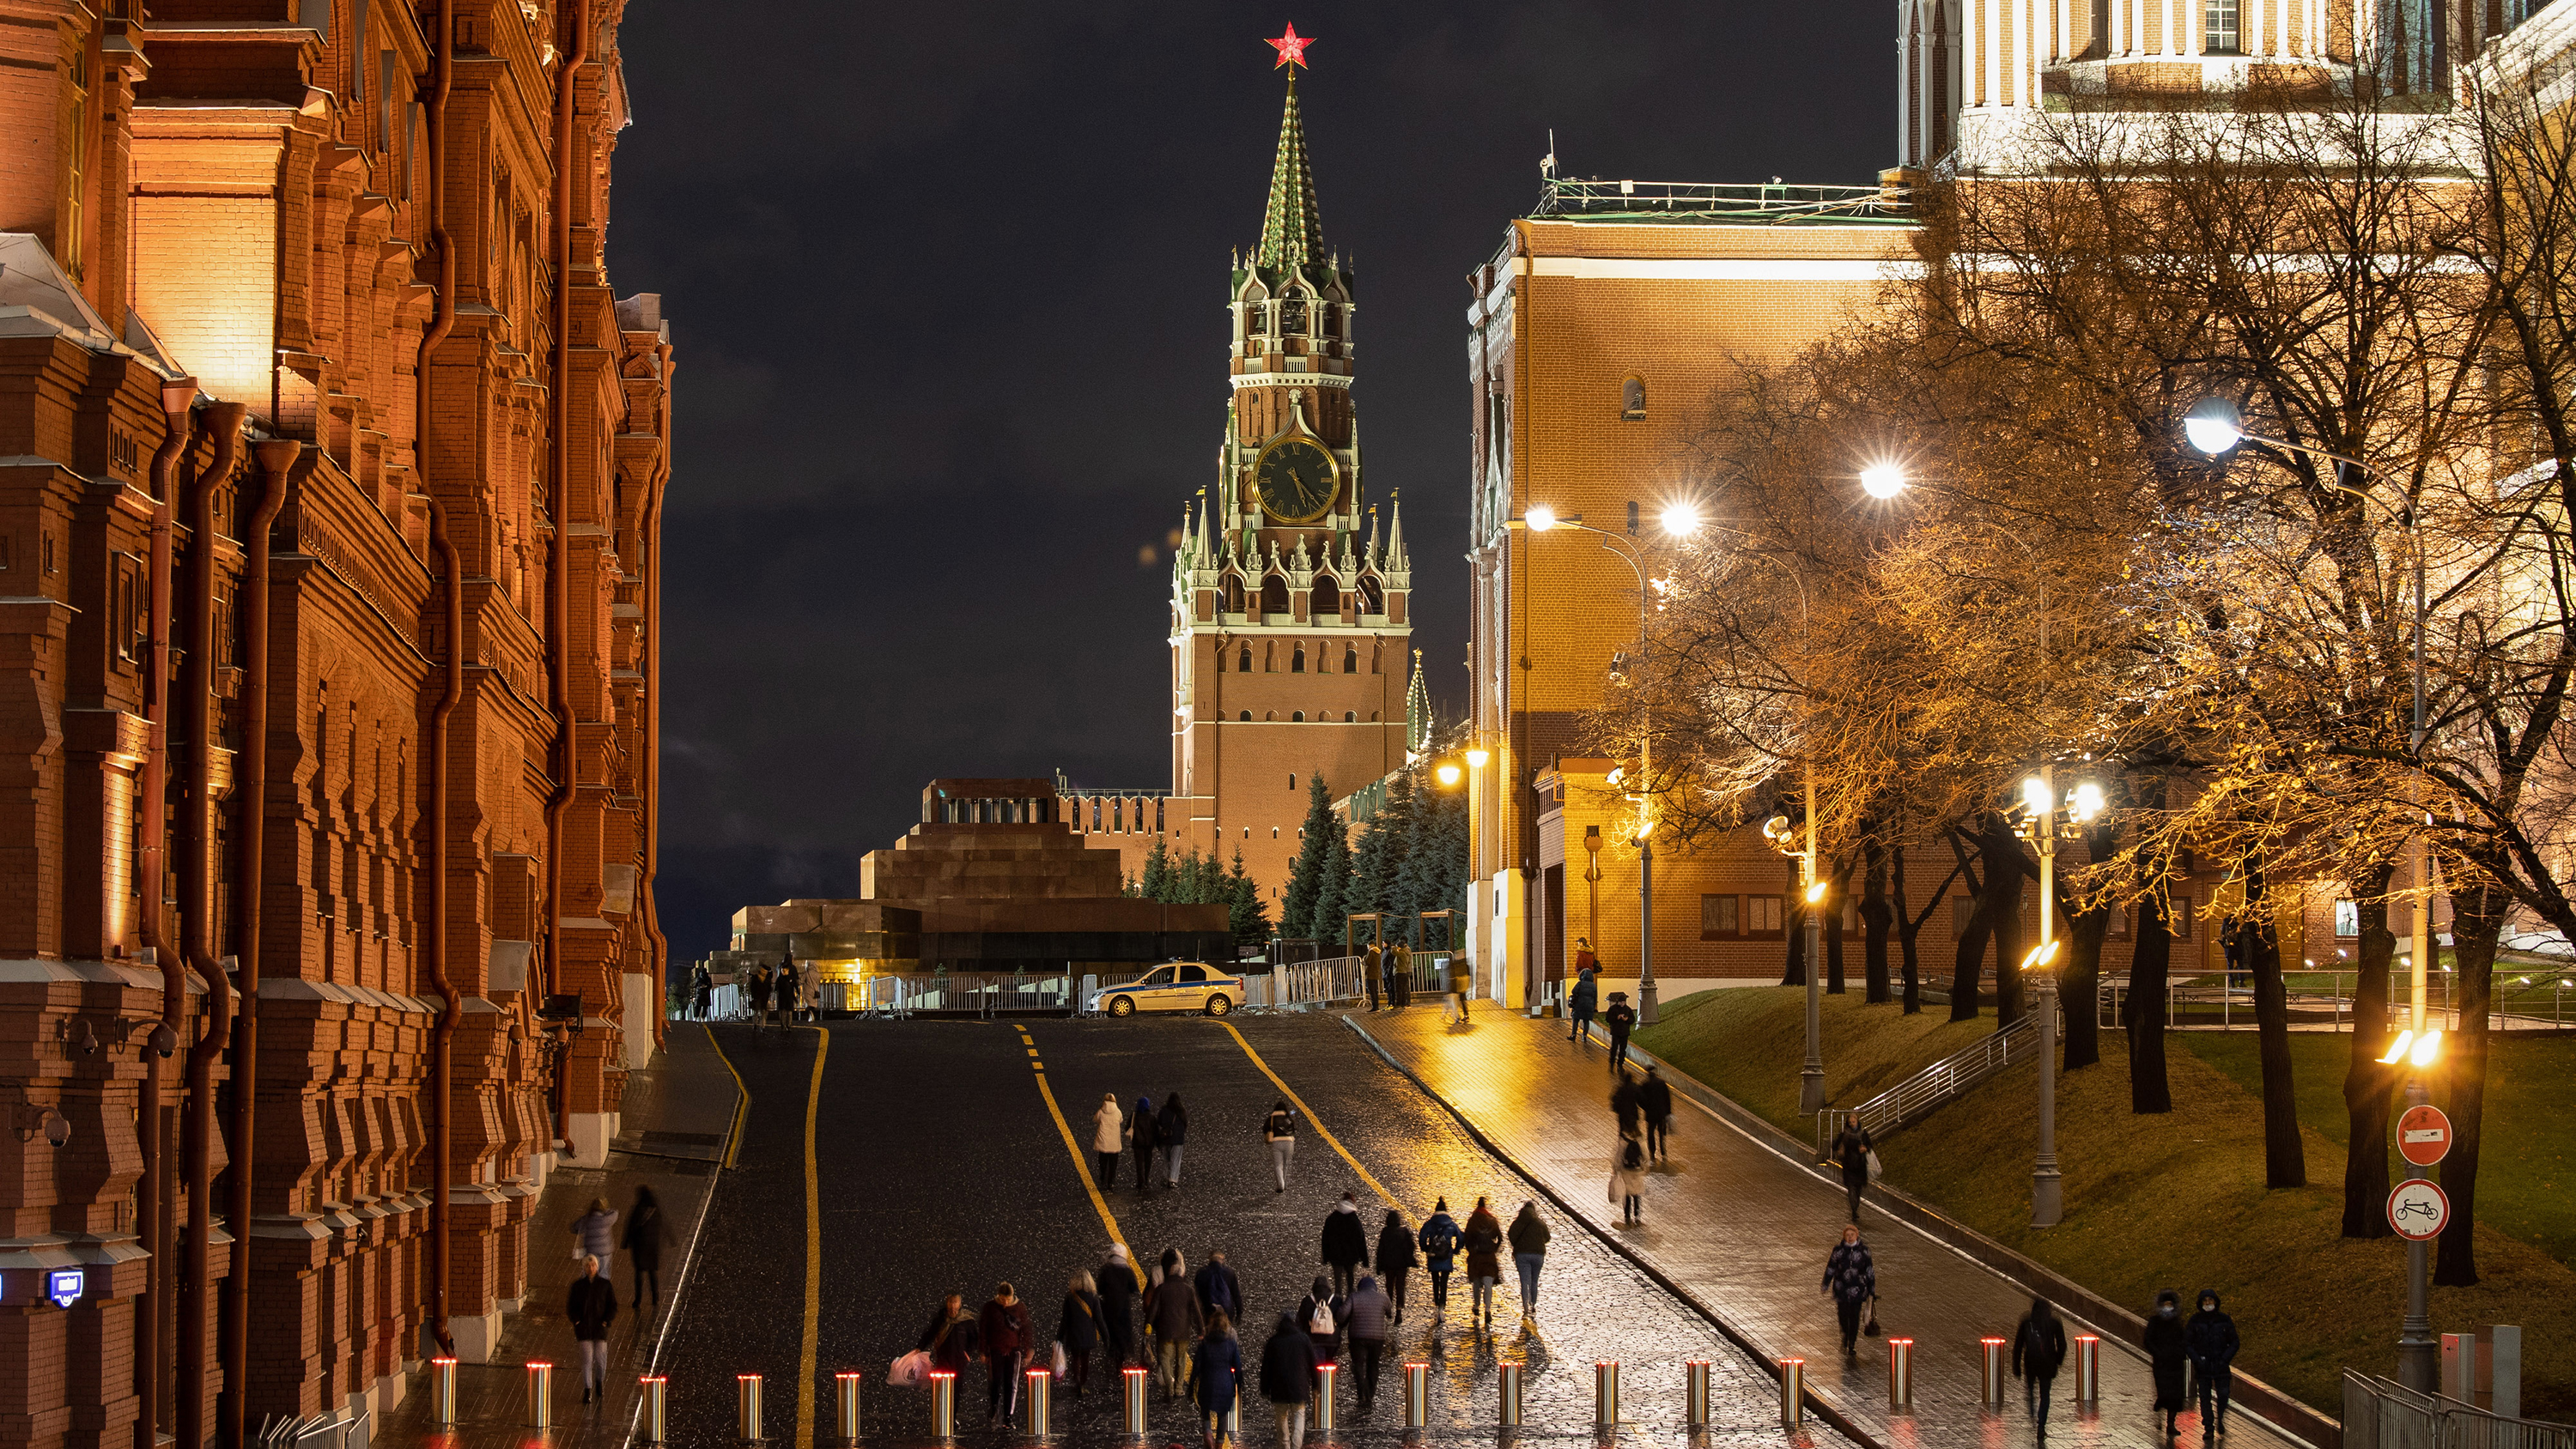 The Spasskaya Tower of the Kremlin in Moscow. 